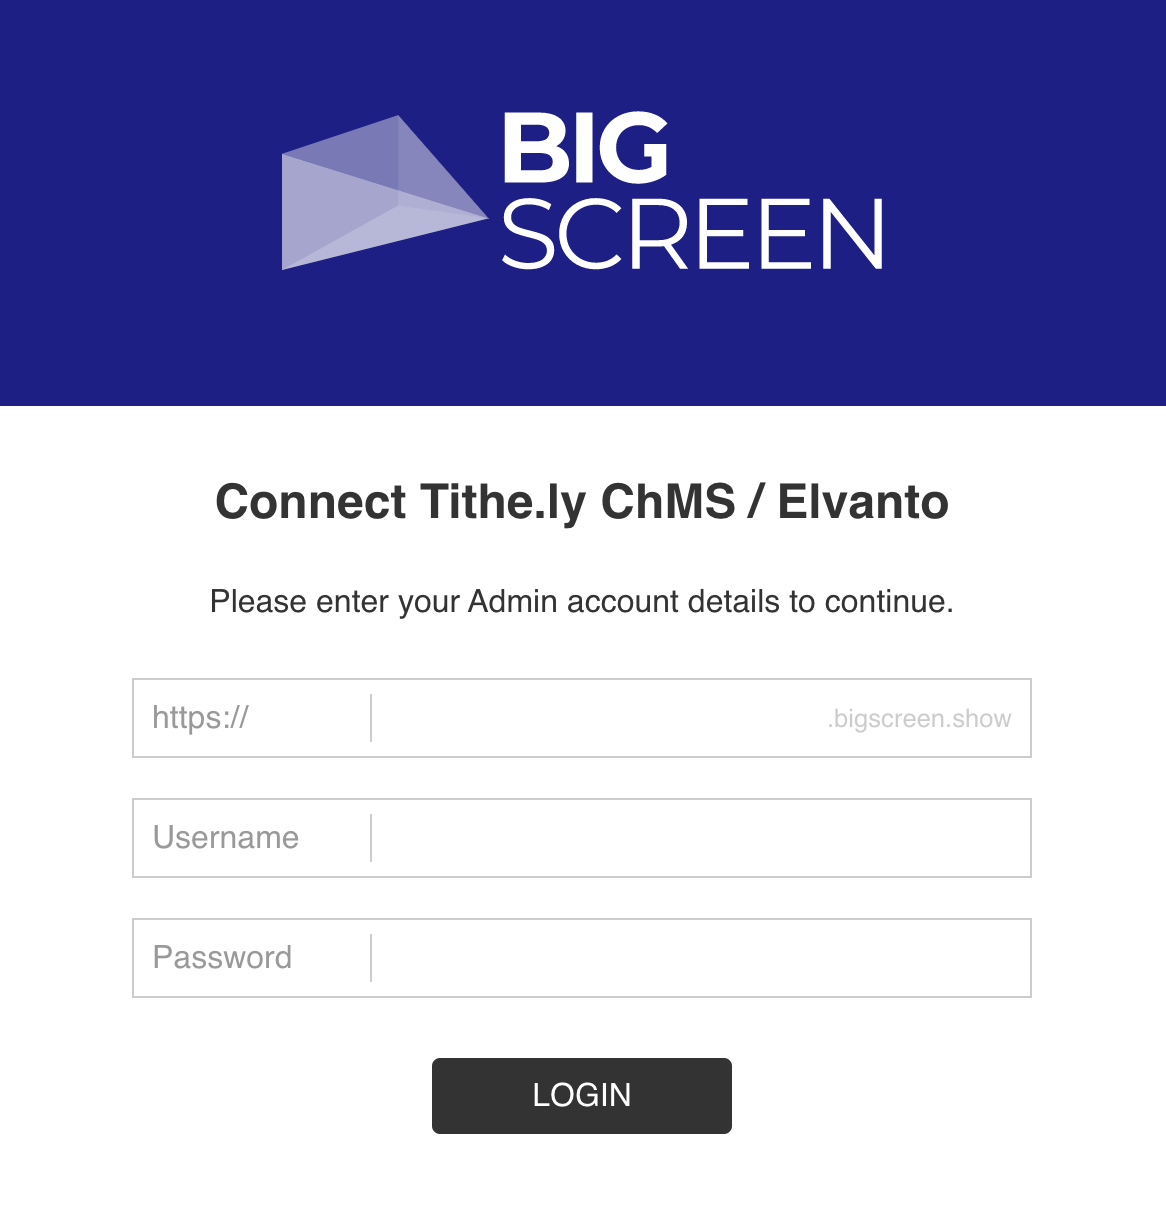 Big Screen Login to Tithe.ly ChHS/Elvanto to connect